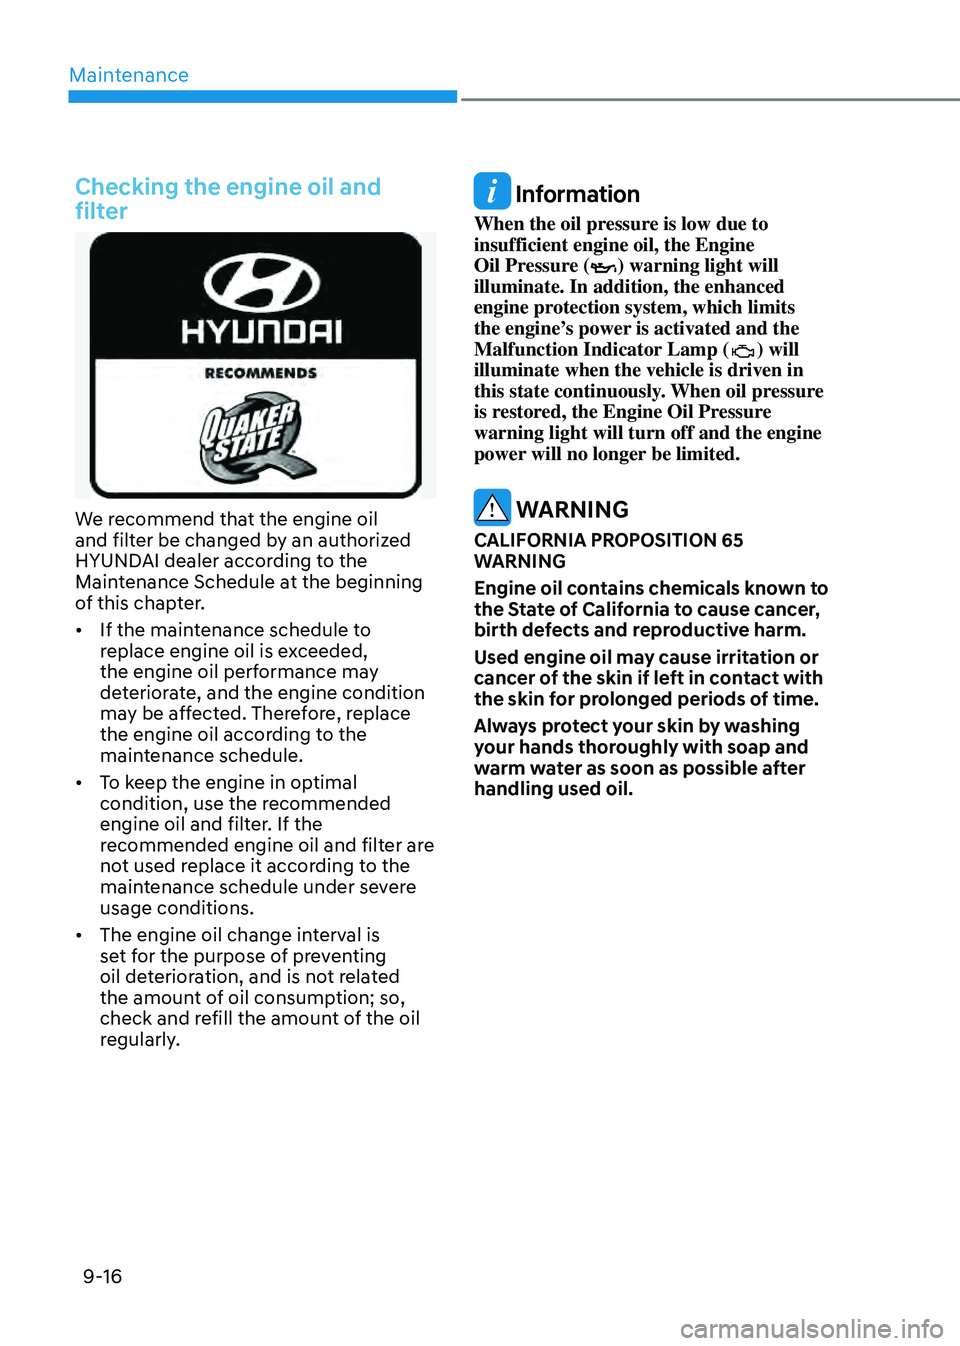 HYUNDAI TUCSON HYBRID 2021  Owners Manual Maintenance
9-16
Checking the engine oil and 
filter
We recommend that the engine oil 
and filter be changed by an authorized 
HYUNDAI dealer according to the 
Maintenance Schedule at the beginning 
o